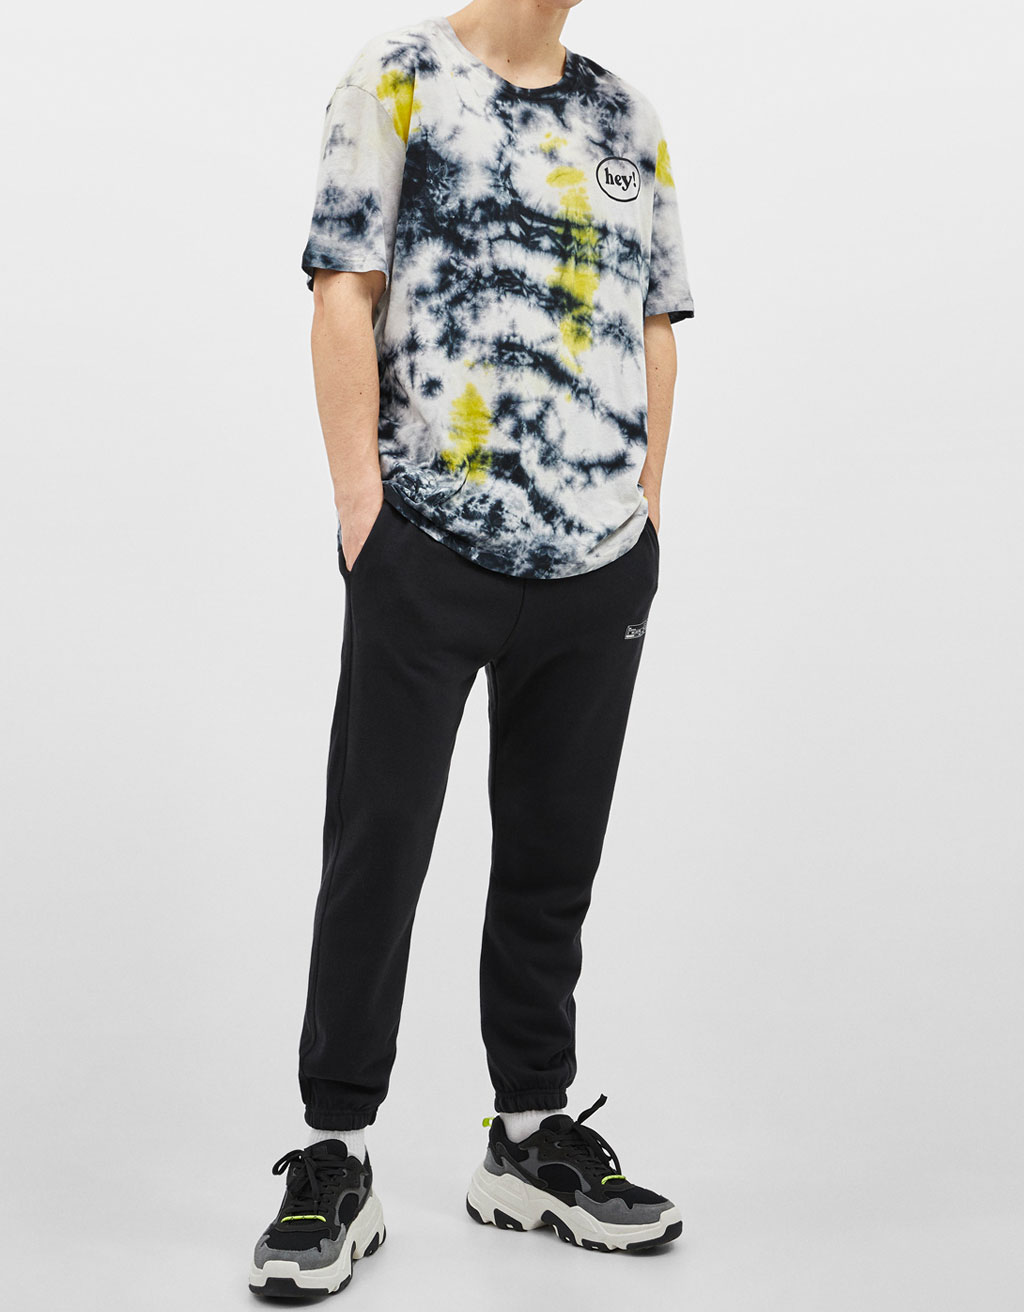 Oversized T-shirt with tie-dye print